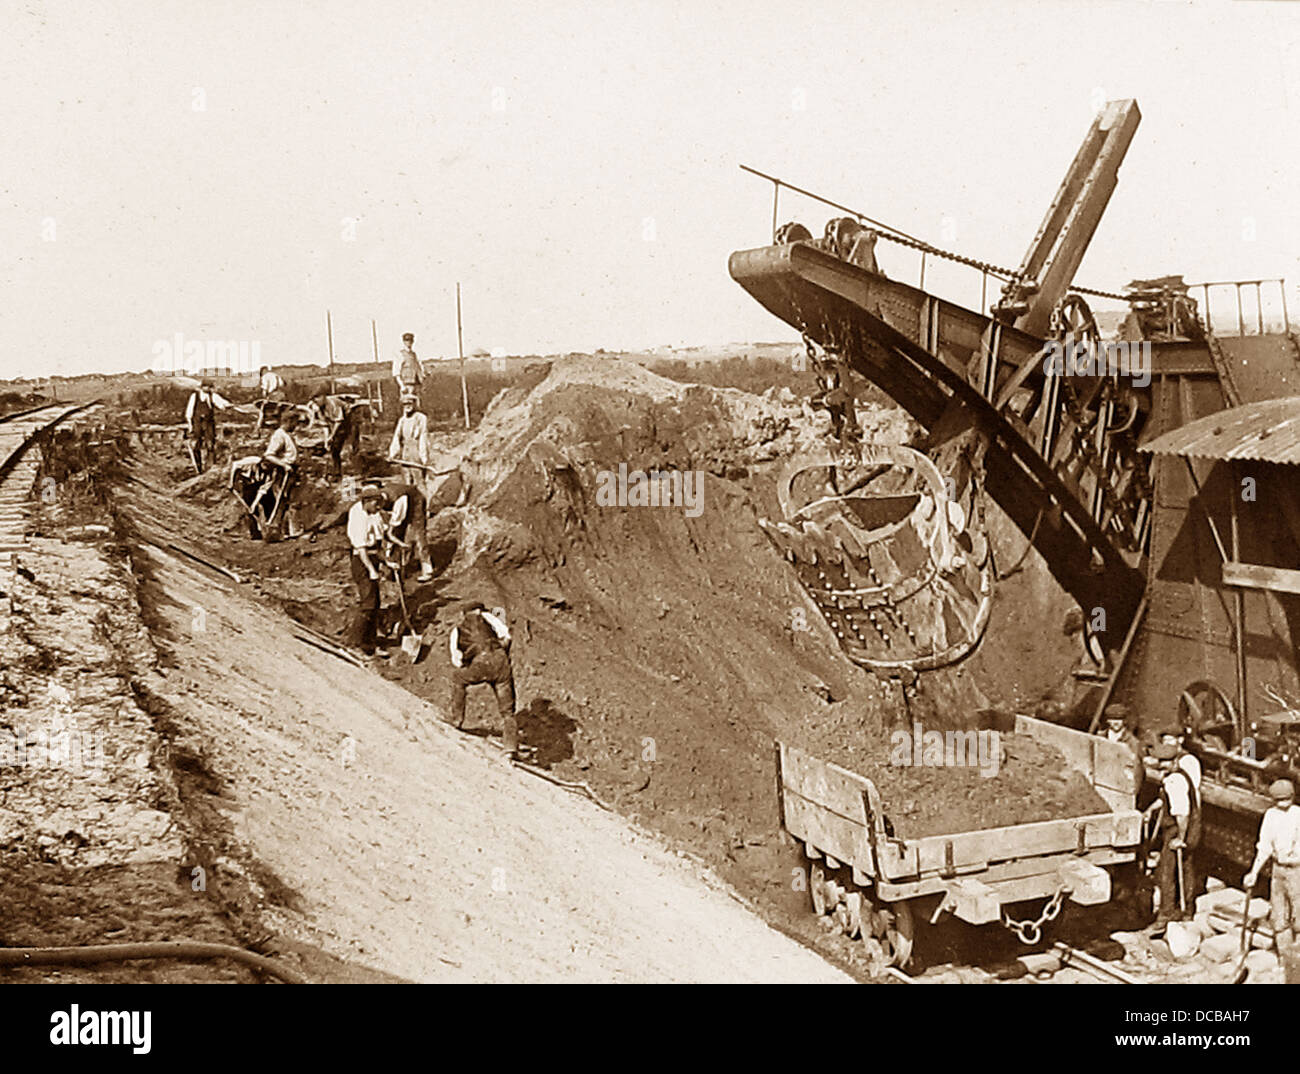 Coal Mining Excavating the line early 1900s Stock Photo